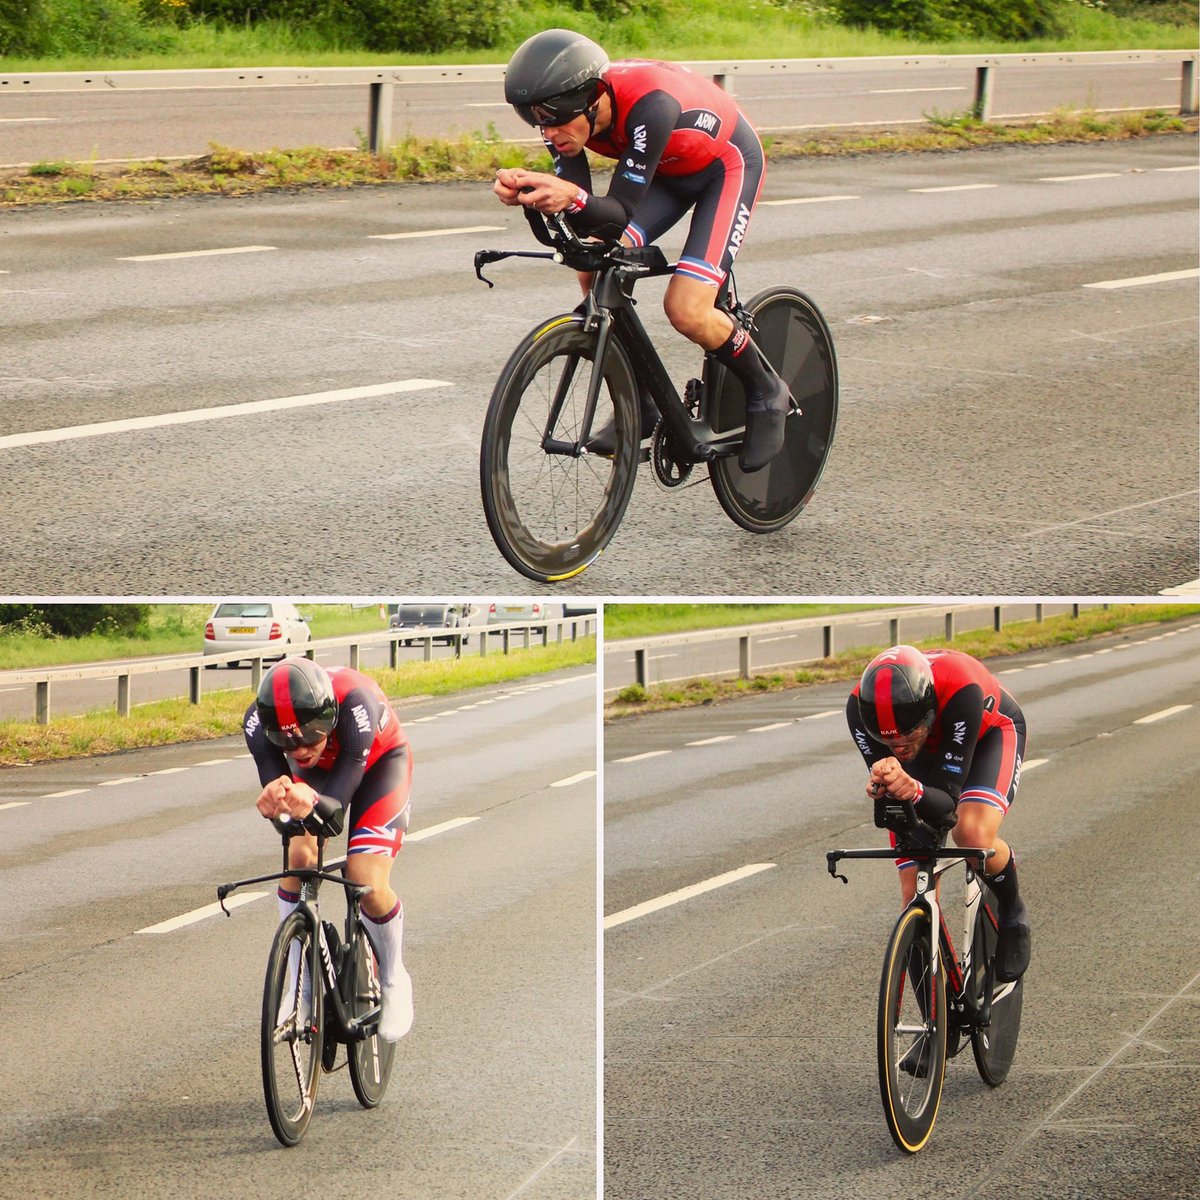 Our Army Time-Triallists were out in force over the weekend at the RN-hosted Inter-Services Time Trial in Yeovil, Somerset. Full CTT race report here: cyclingtimetrials.org.uk/race-report/26… #inspiringsoldierstocycle